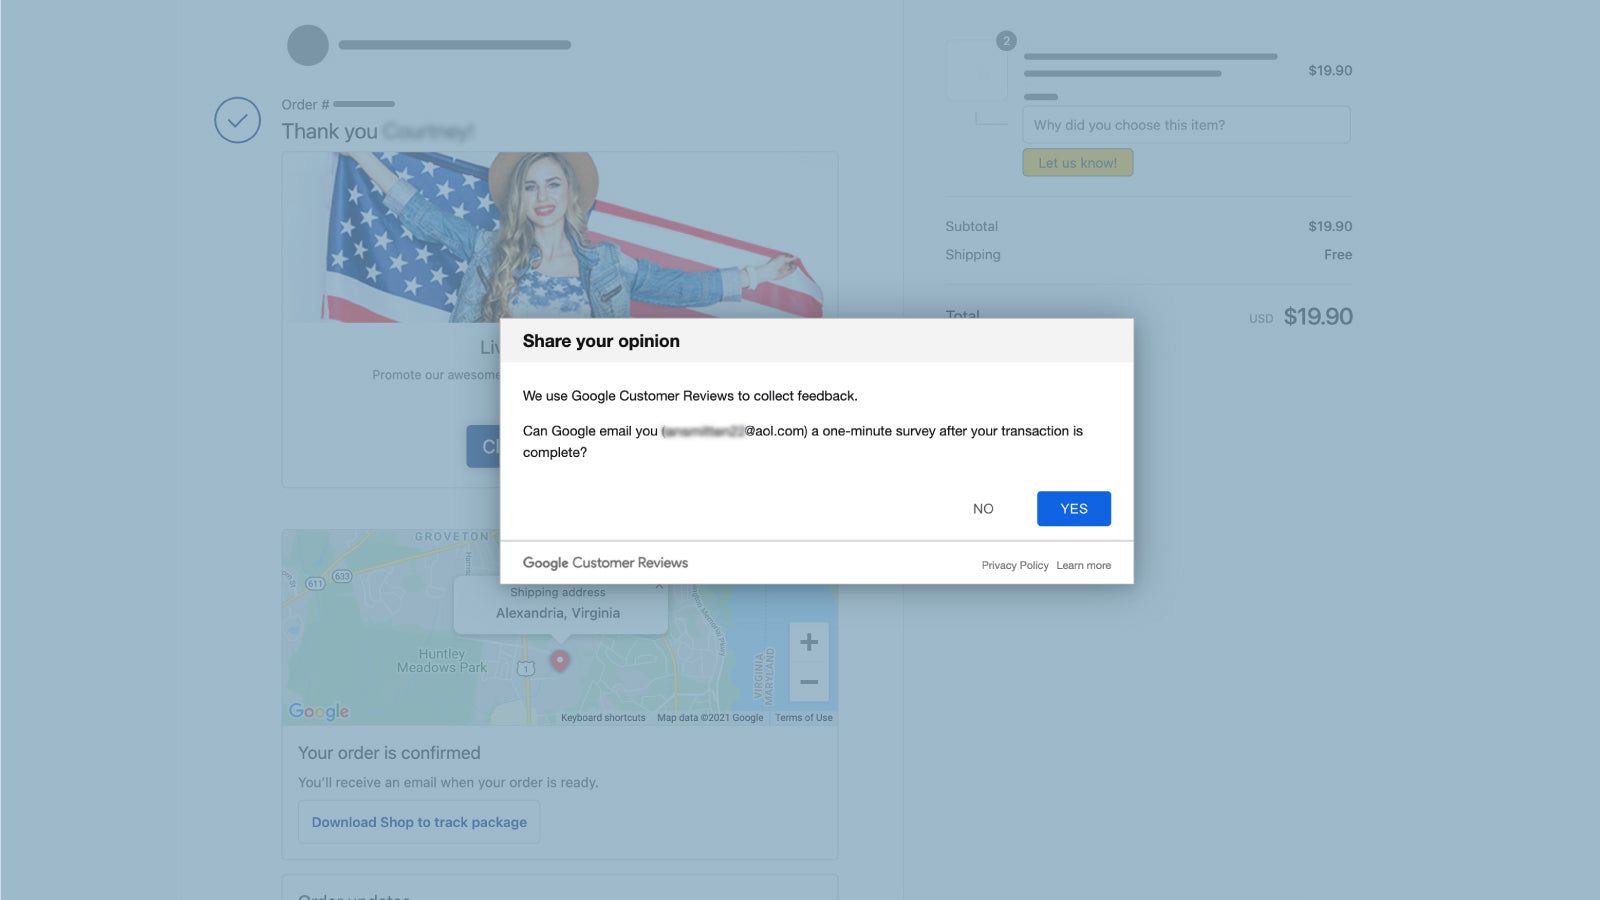 Automatically display Survey Opt-in Module to Customers.